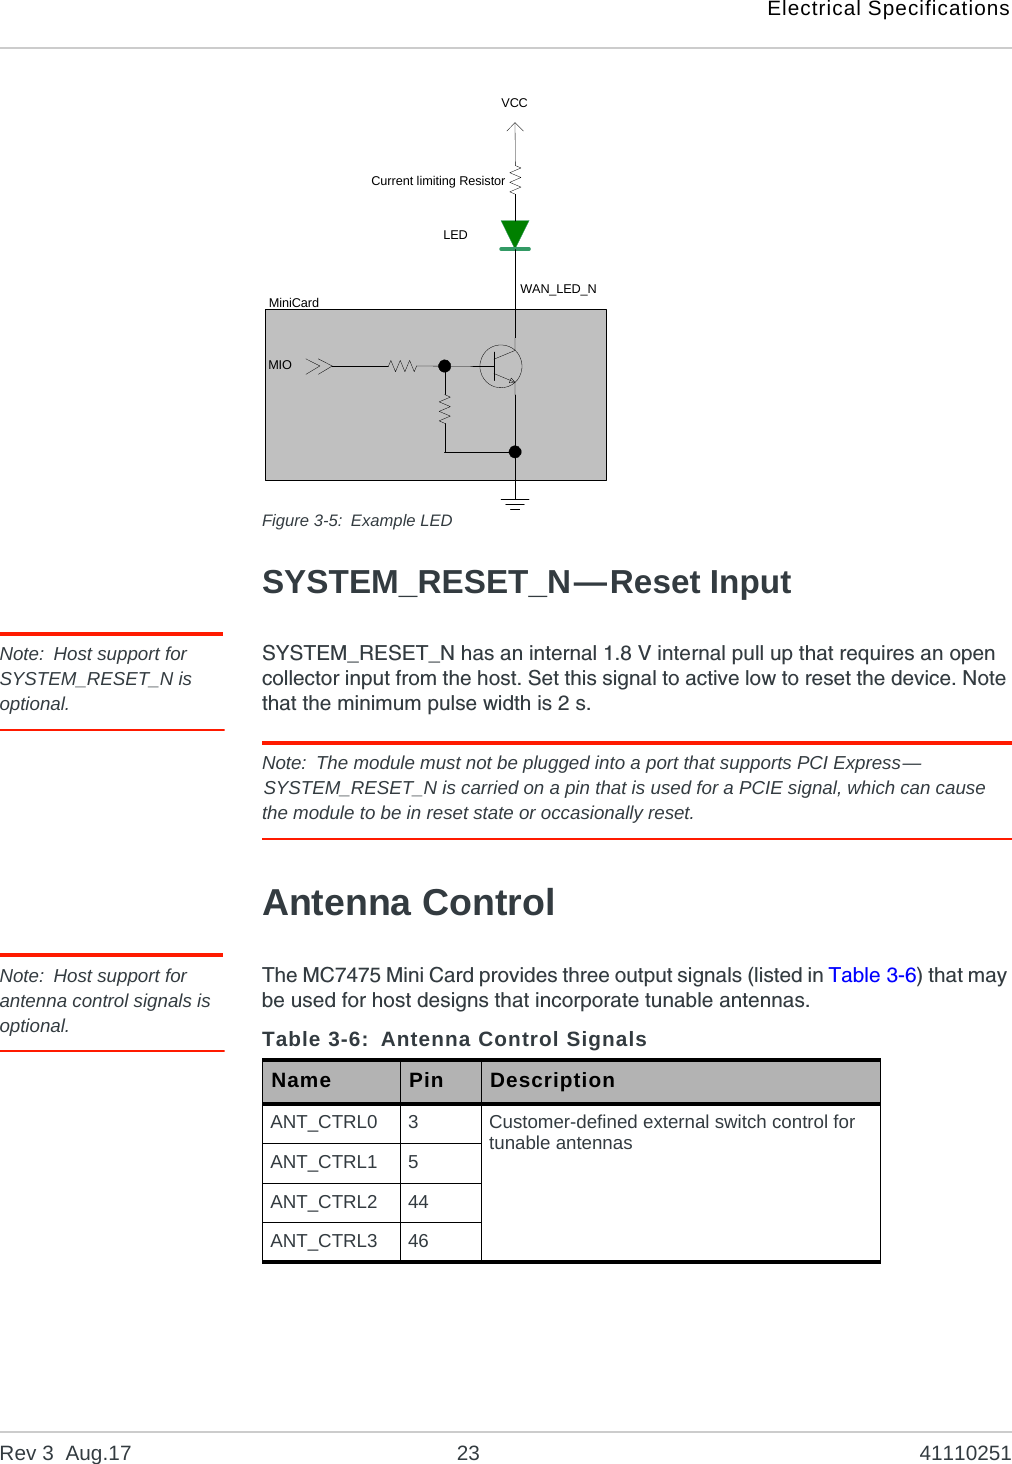 Electrical SpecificationsRev 3  Aug.17 23 41110251  Figure 3-5: Example LEDSYSTEM_RESET_N—Reset InputNote: Host support for SYSTEM_RESET_N is optional.SYSTEM_RESET_N has an internal 1.8 V internal pull up that requires an open collector input from the host. Set this signal to active low to reset the device. Note that the minimum pulse width is 2 s.Note: The module must not be plugged into a port that supports PCI Express—SYSTEM_RESET_N is carried on a pin that is used for a PCIE signal, which can cause the module to be in reset state or occasionally reset.Antenna ControlNote: Host support for antenna control signals is optional.The MC7475 Mini Card provides three output signals (listed in Table 3-6) that may be used for host designs that incorporate tunable antennas.Current limiting ResistorLEDVCCMIOMiniCard WAN_LED_NTable 3-6: Antenna Control SignalsName Pin DescriptionANT_CTRL0 3Customer-defined external switch control for tunable antennasANT_CTRL1 5ANT_CTRL2 44ANT_CTRL3 46